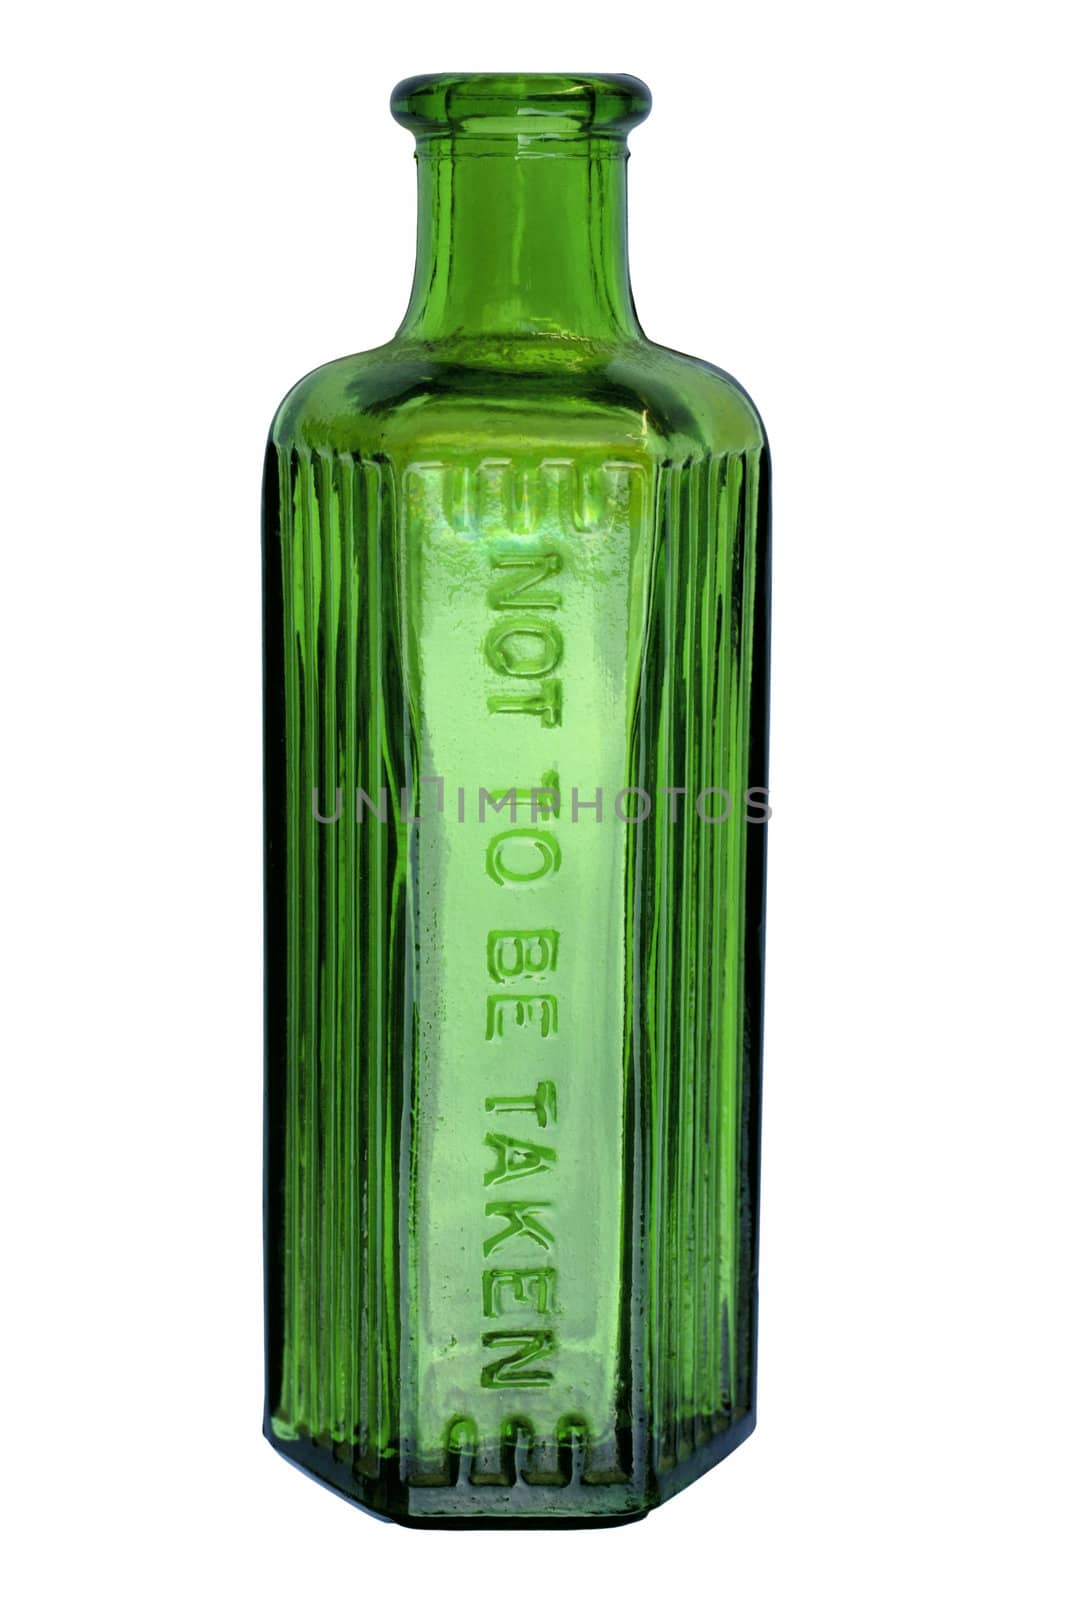 Green Bottle (with clipping path) by Bateleur